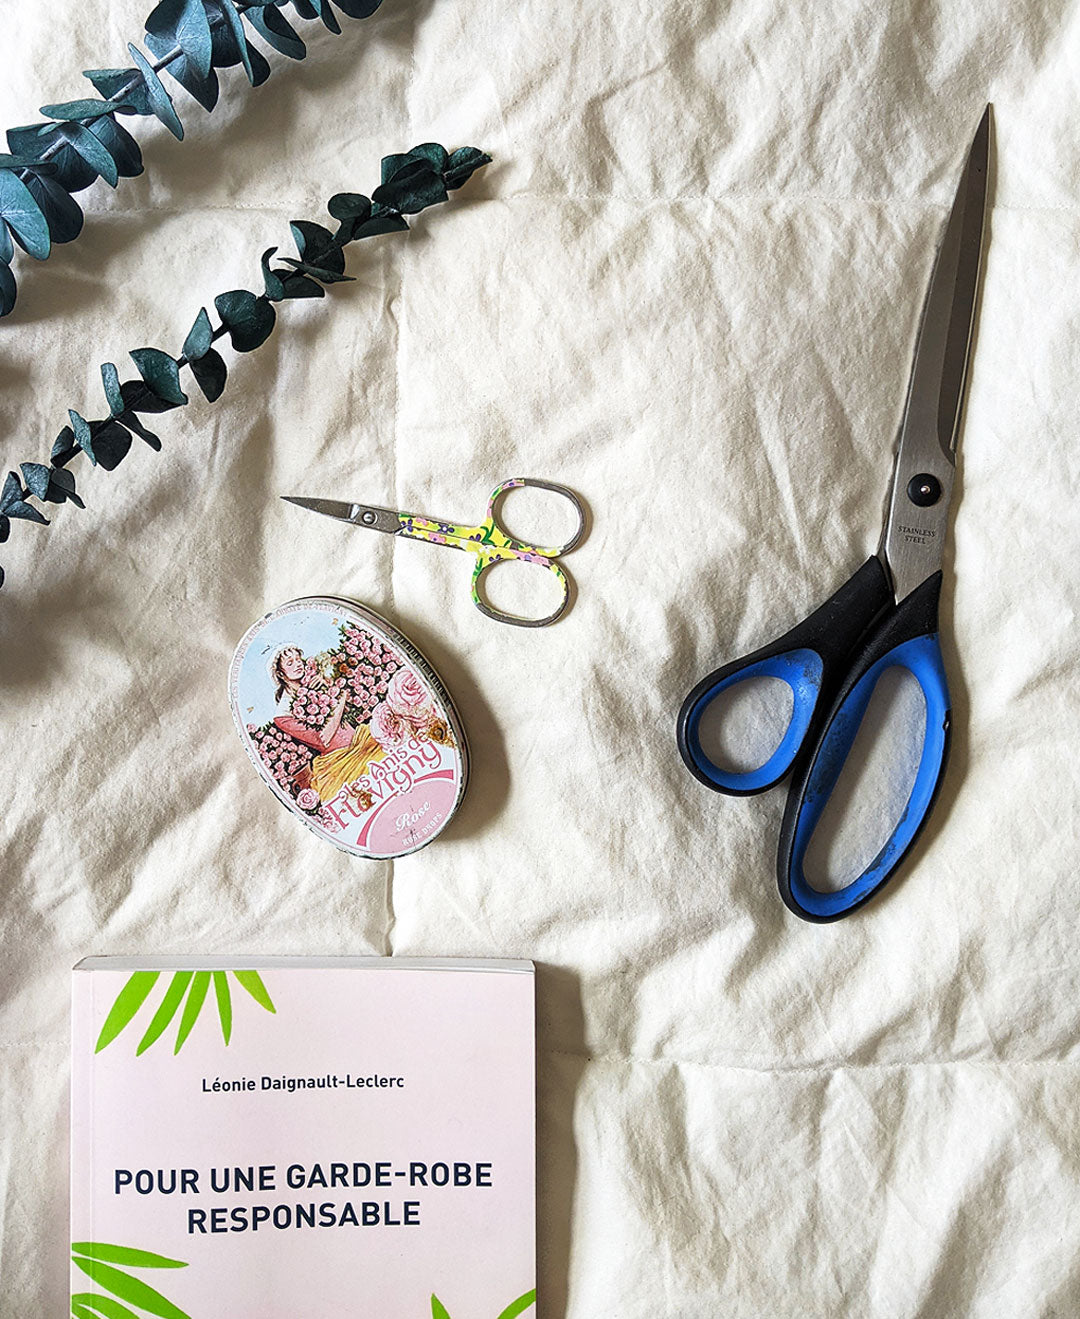 Sewing Course Duo: Mending by hand and with a sewing machine